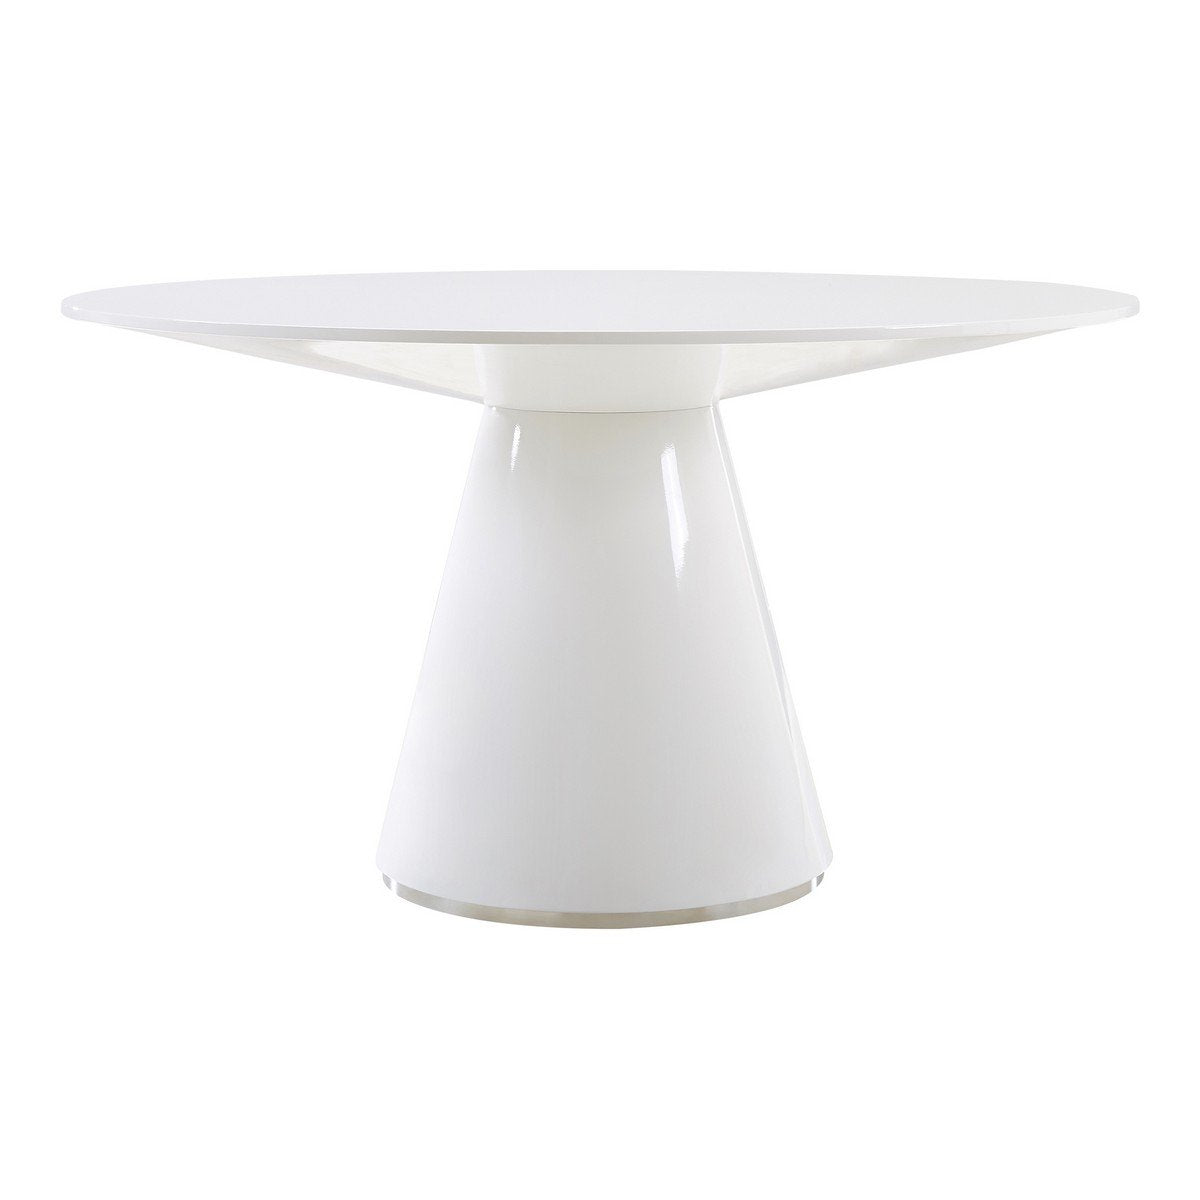 Moe's Home Collection Otago Dining Table 54In Round White - KC-1029-18 - Moe's Home Collection - Dining Tables - Minimal And Modern - 1